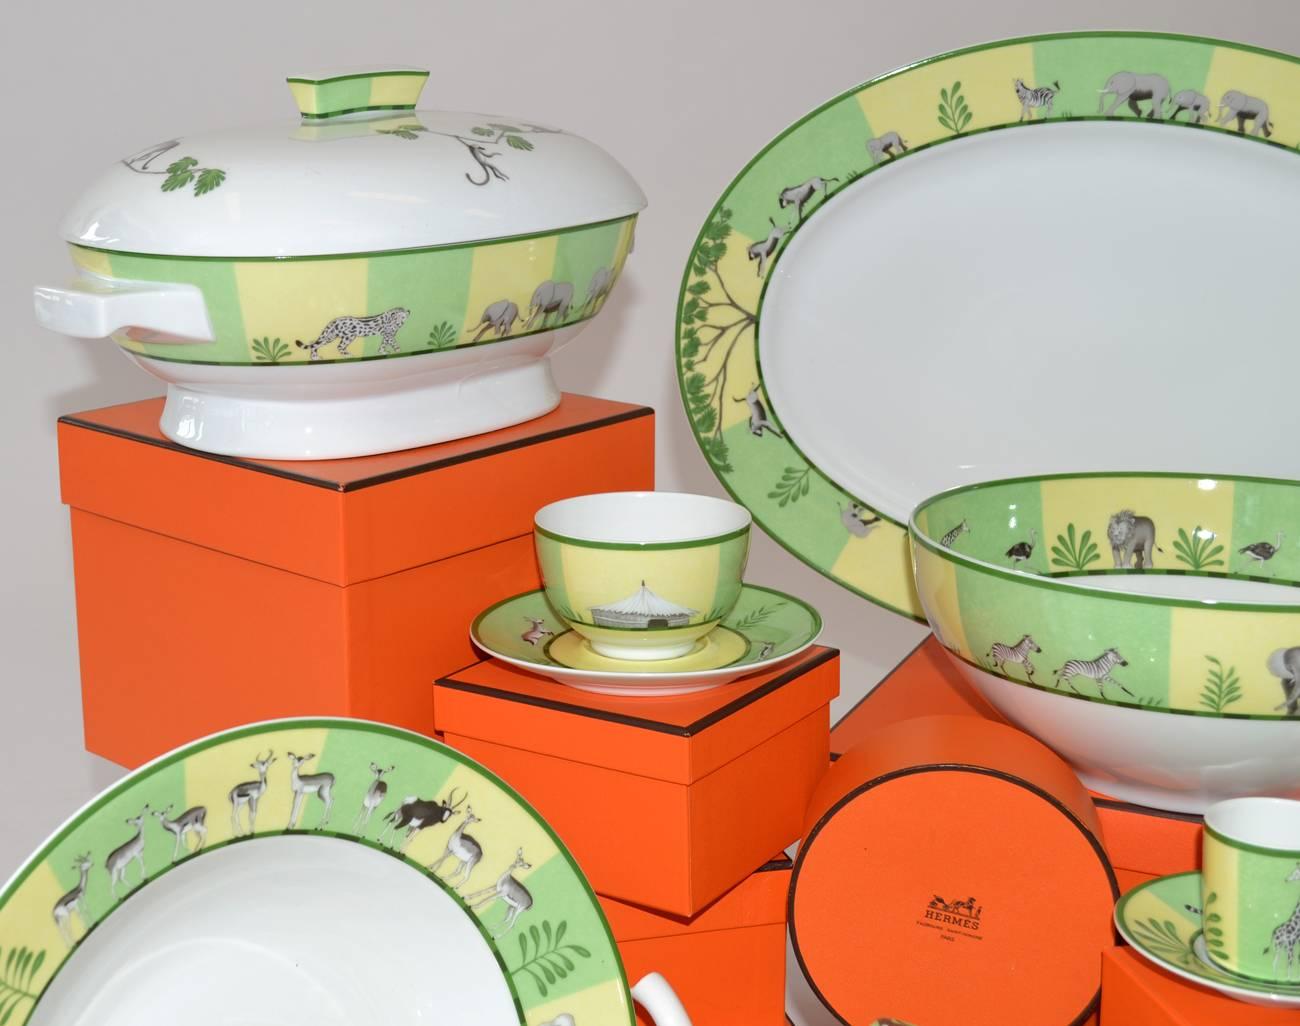 54 pieces of Hermès porcelain dinnerware china in the 'Africa green' pattern. Complete set for eight plus completer pieces (54 pieces total): 8 dinner plates, 8 salad plates, 8 soup bowls, 8 cups & saucers, 8 demitasse cups & saucers, teapot,